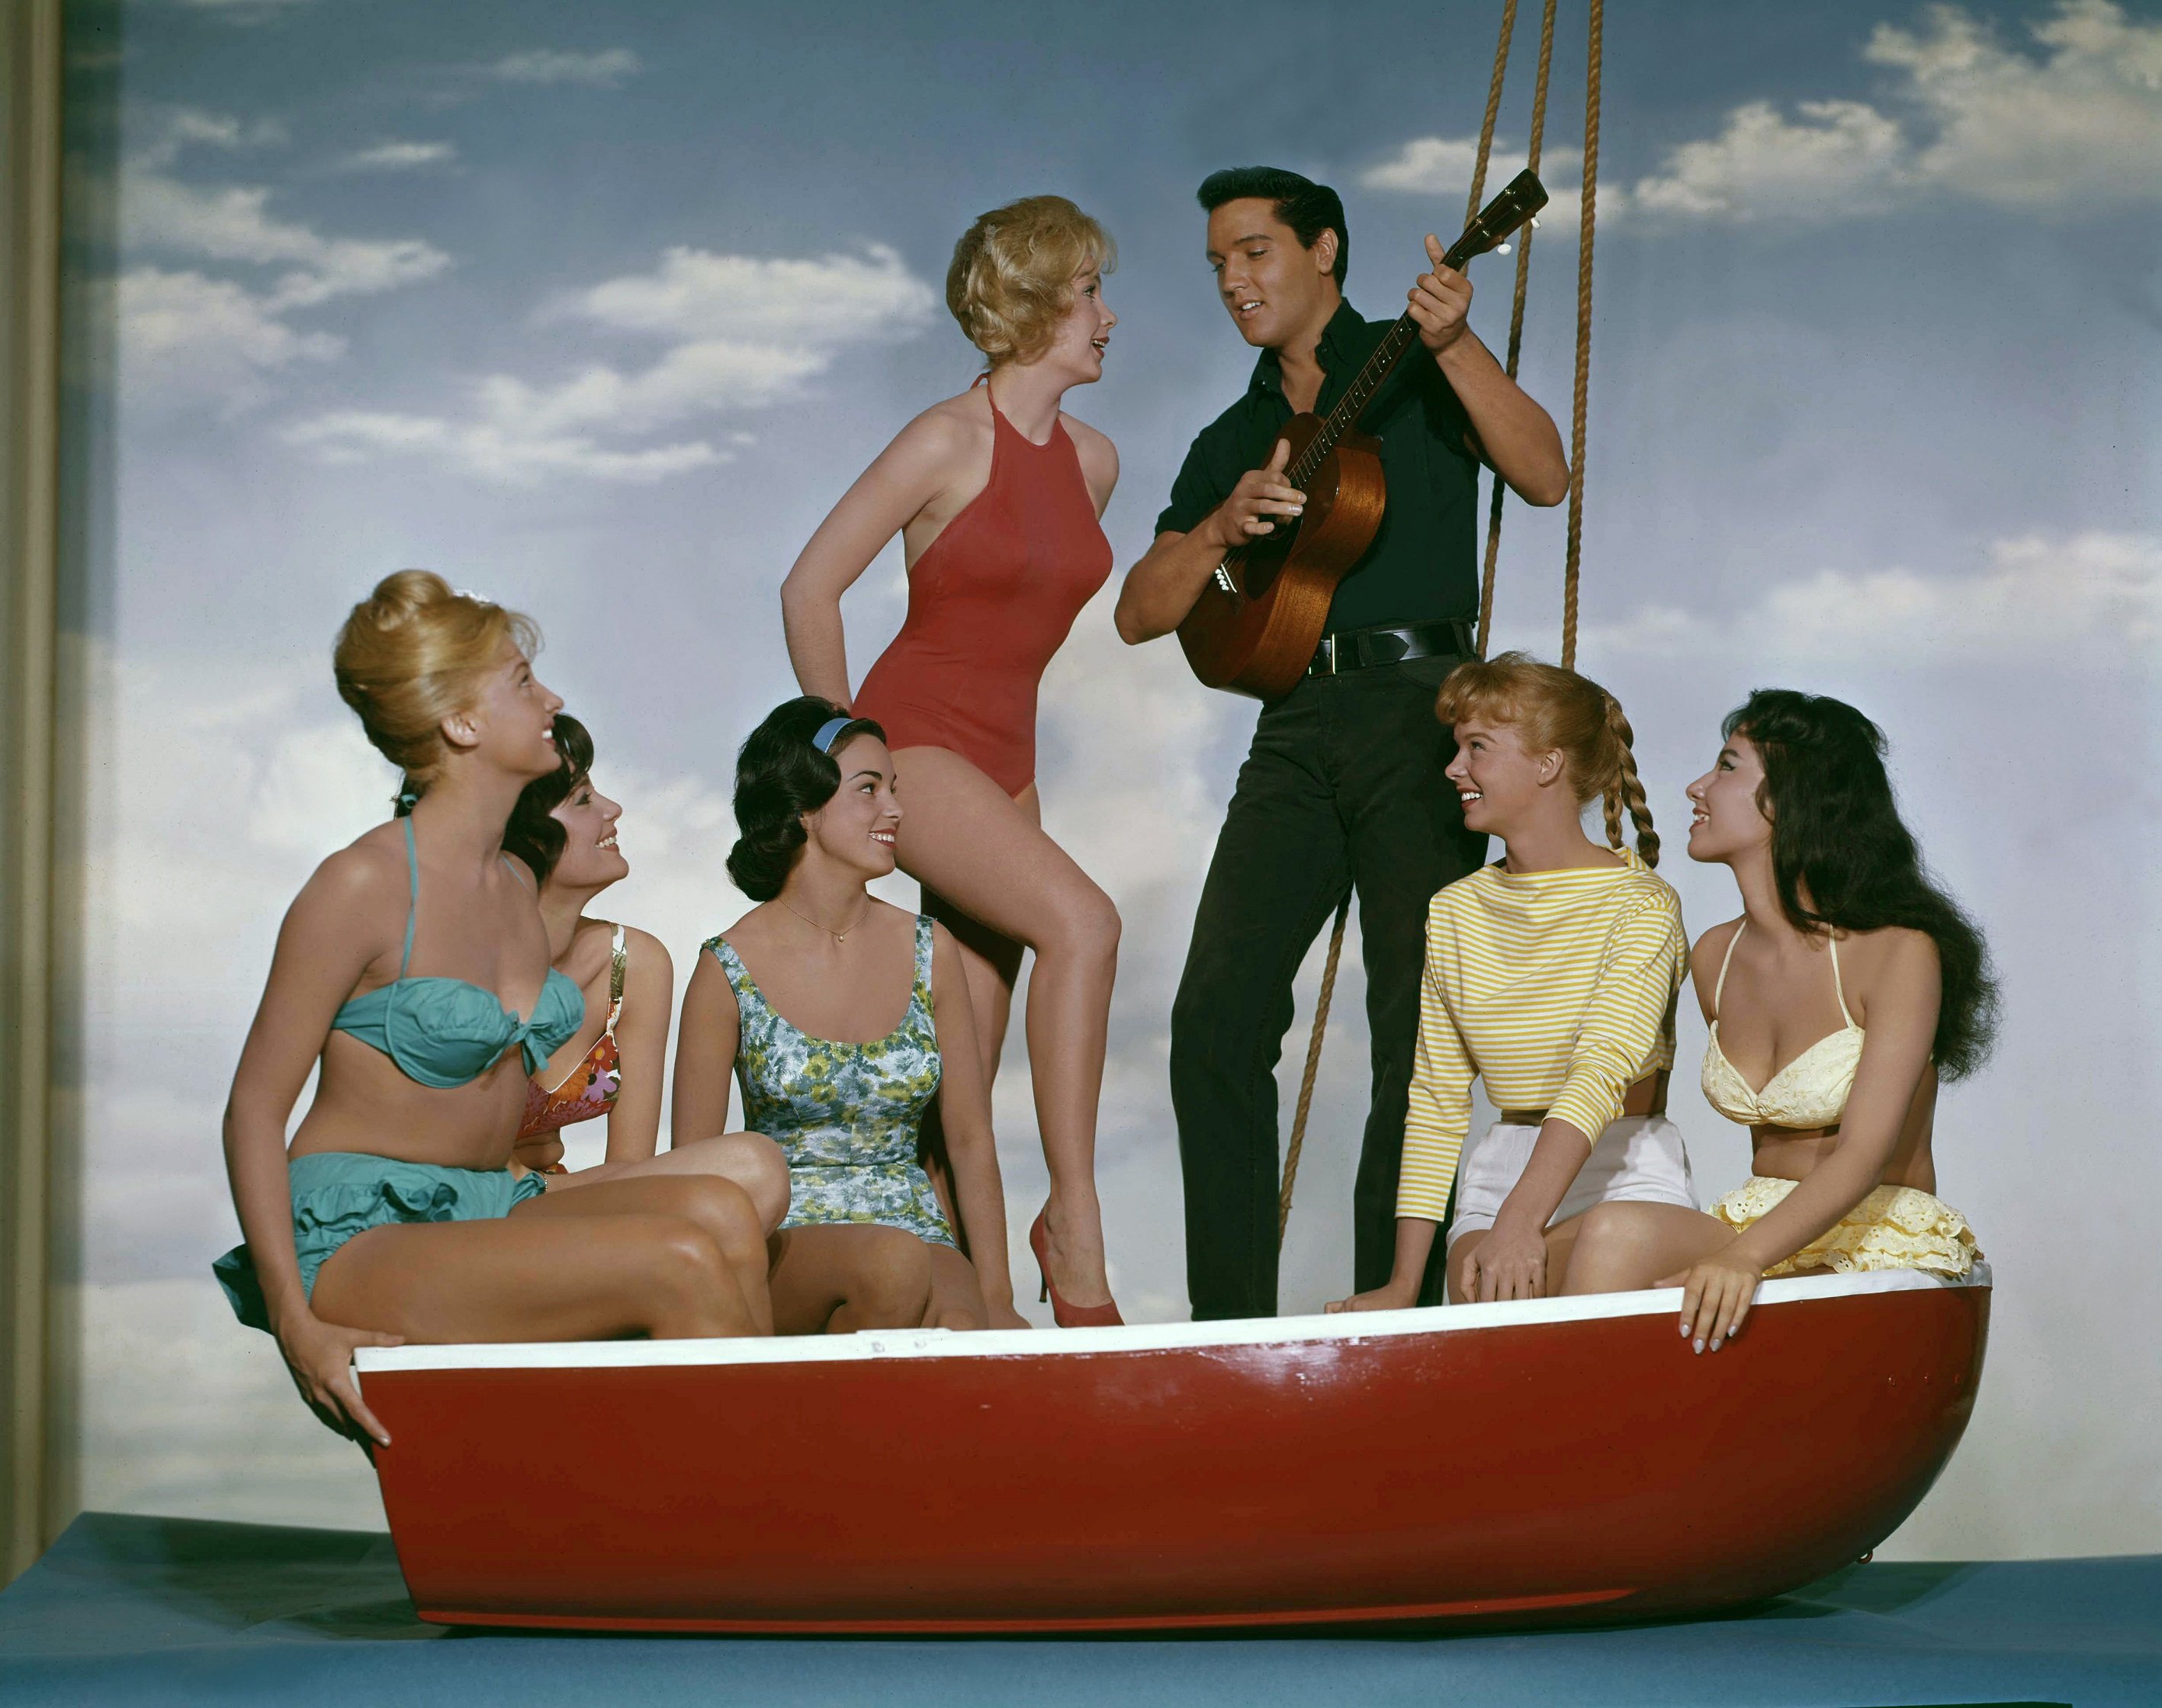 Elvis Presley strumming his guitar on a boat surrounded by other actors